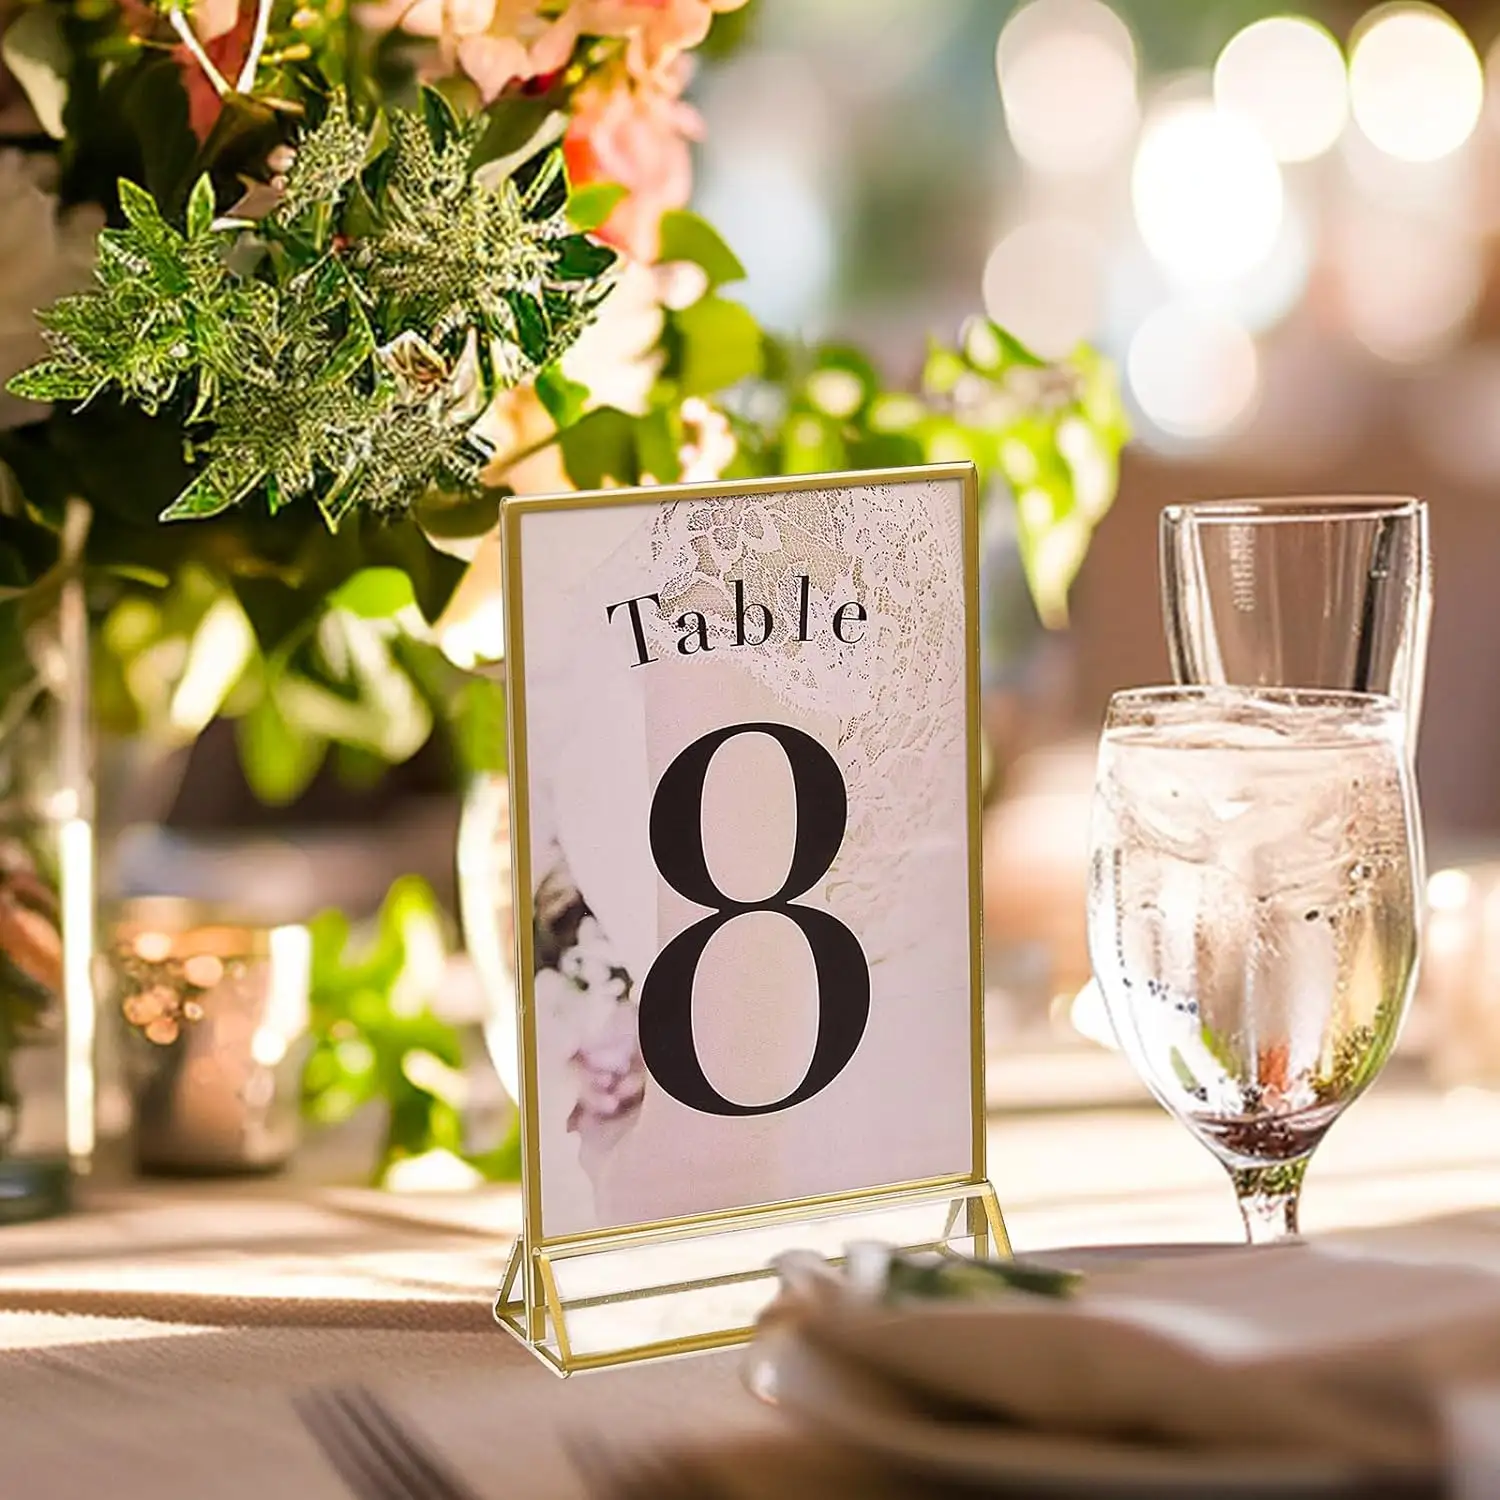 Wedding Centerpieces Acrylic Gold Table Numbers For Wedding Table decorations